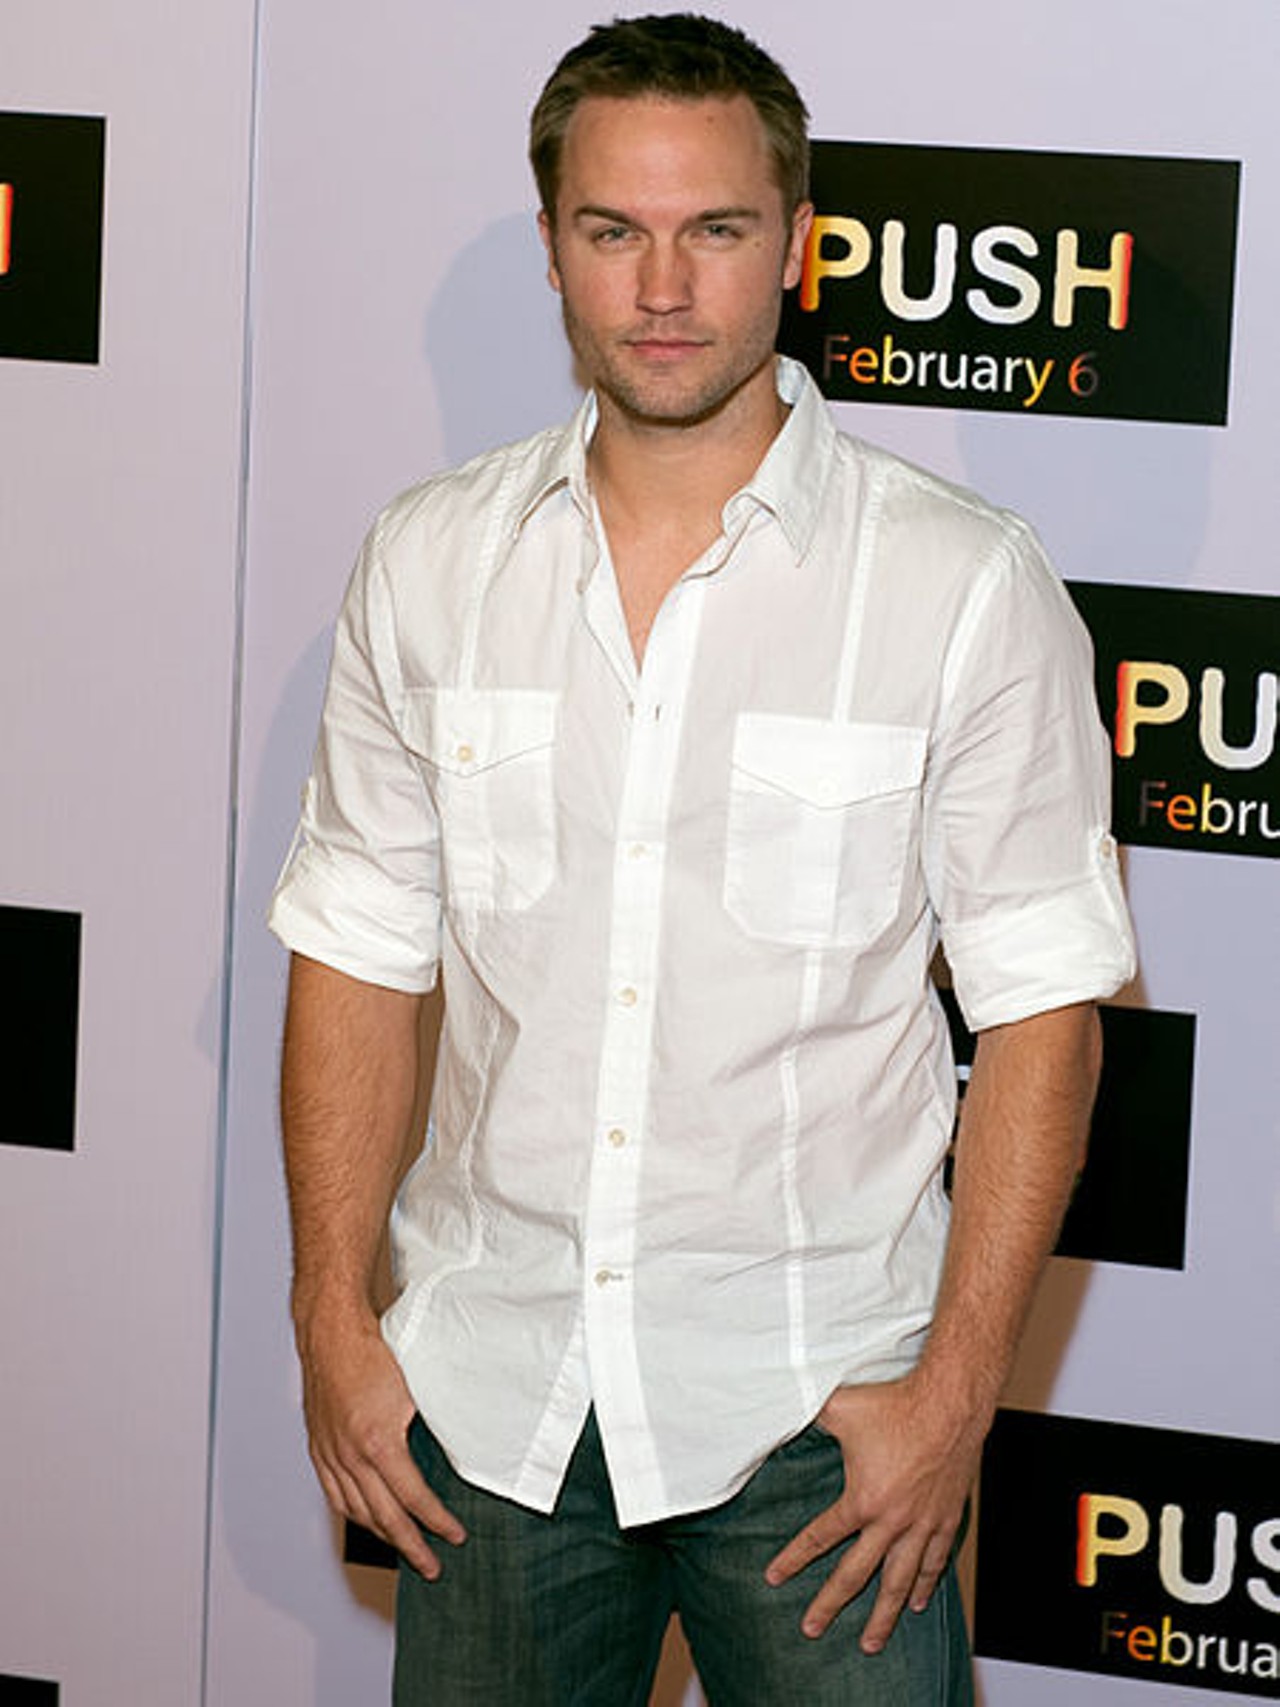 Scott Porter- An actor known for his role in the show Friday Night Lights and the movie Dear John.